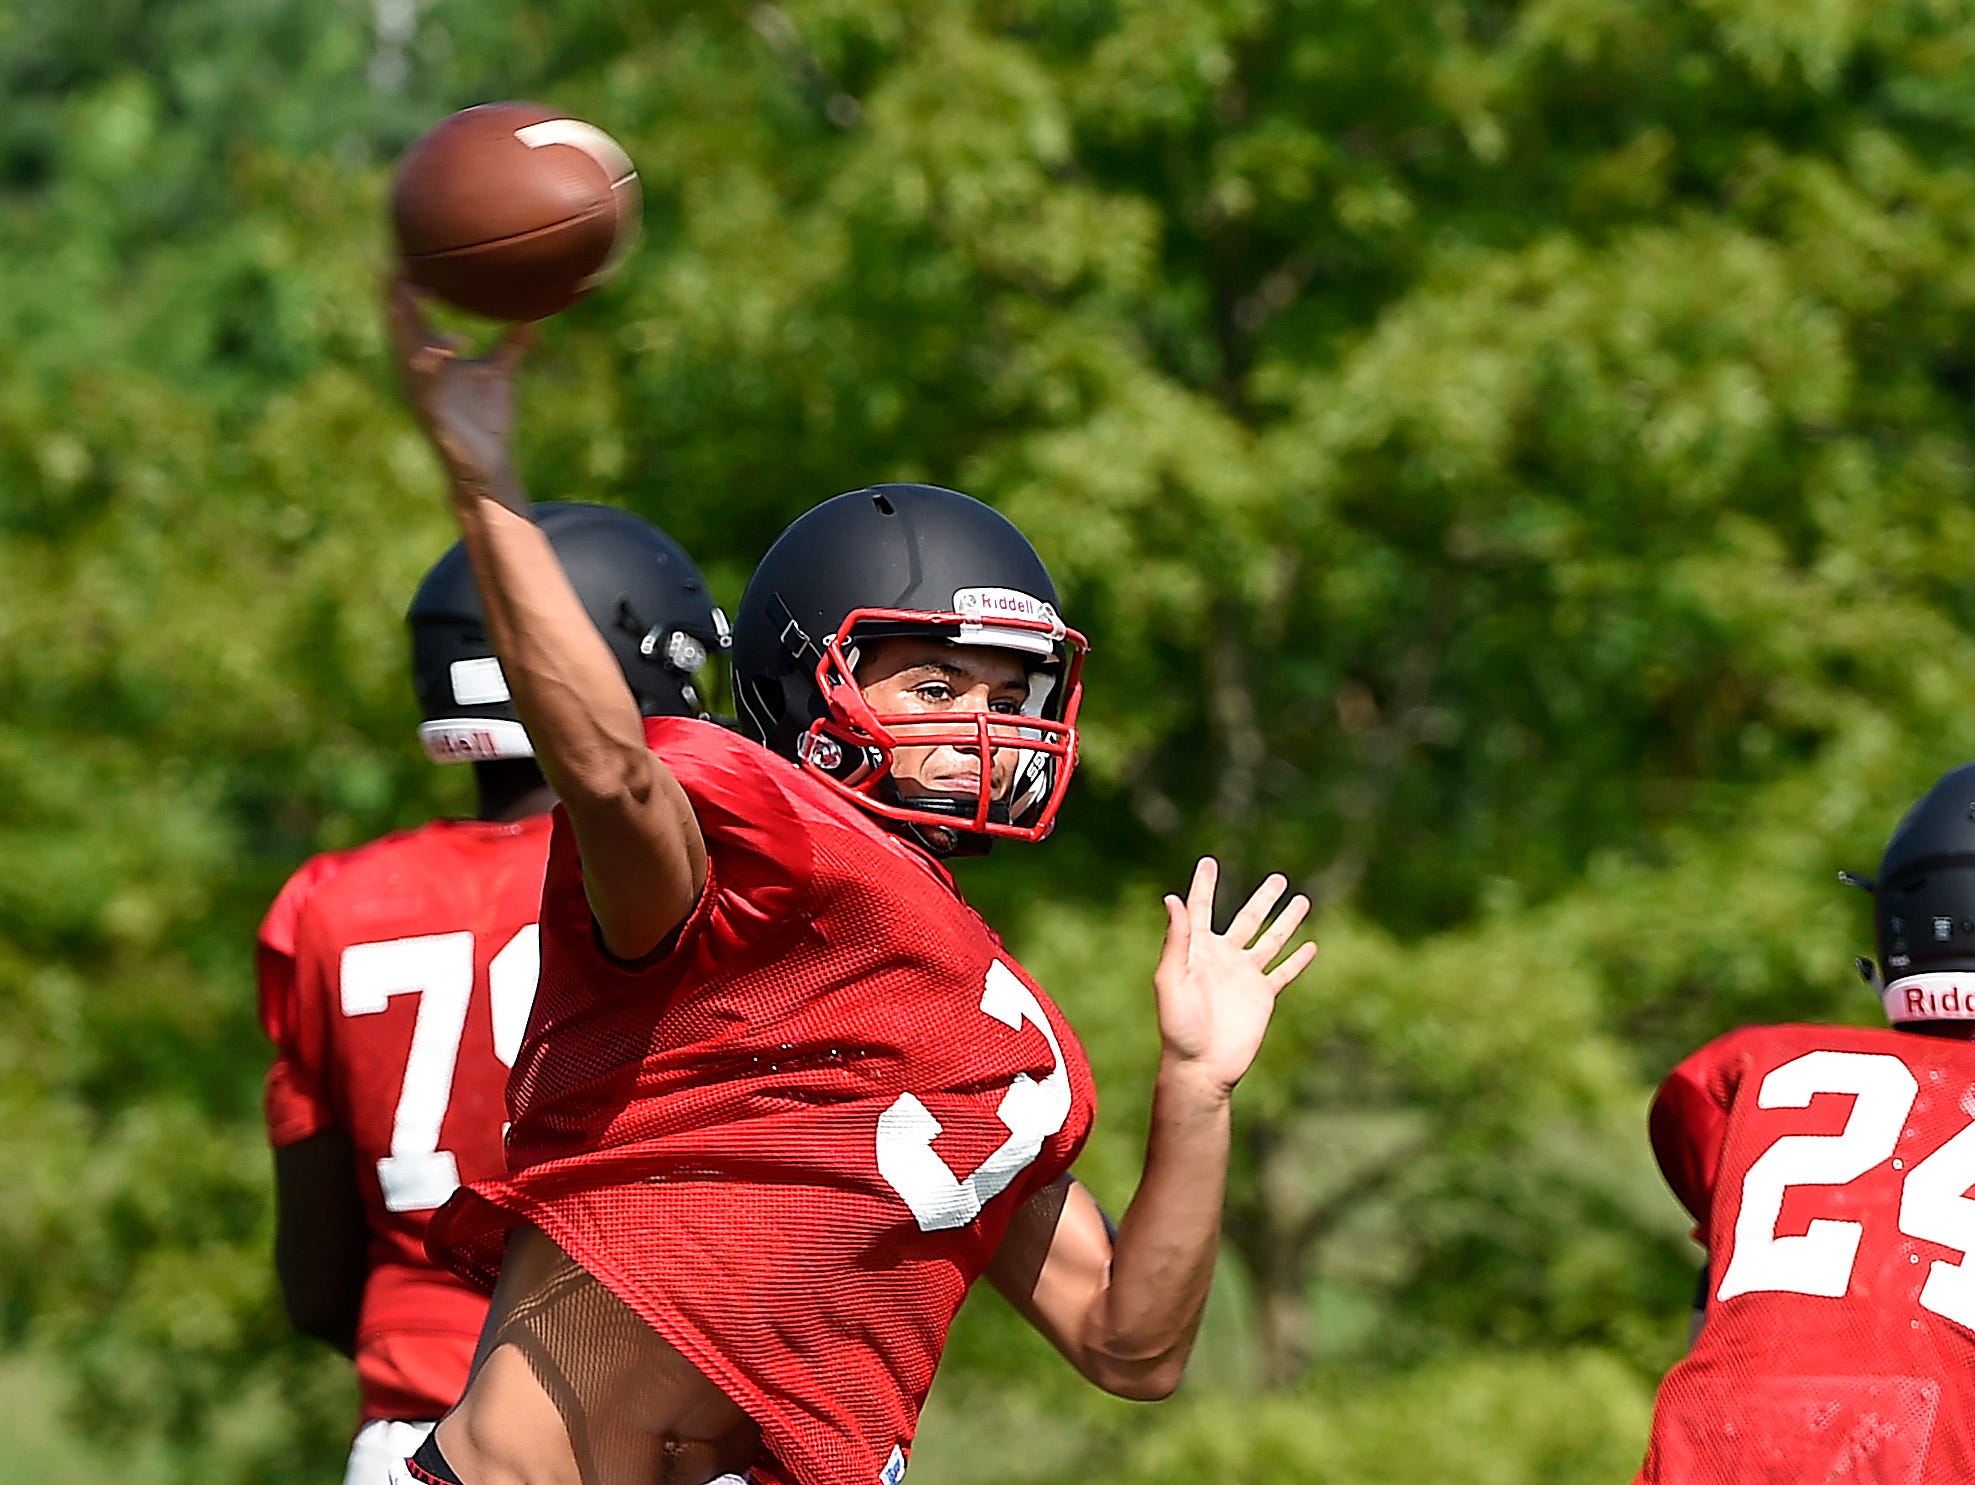 Ravenwood's Blake VanLandingham throws during practice Monday, the first day Tennessee high school football teams were allowed to practice in full pads.